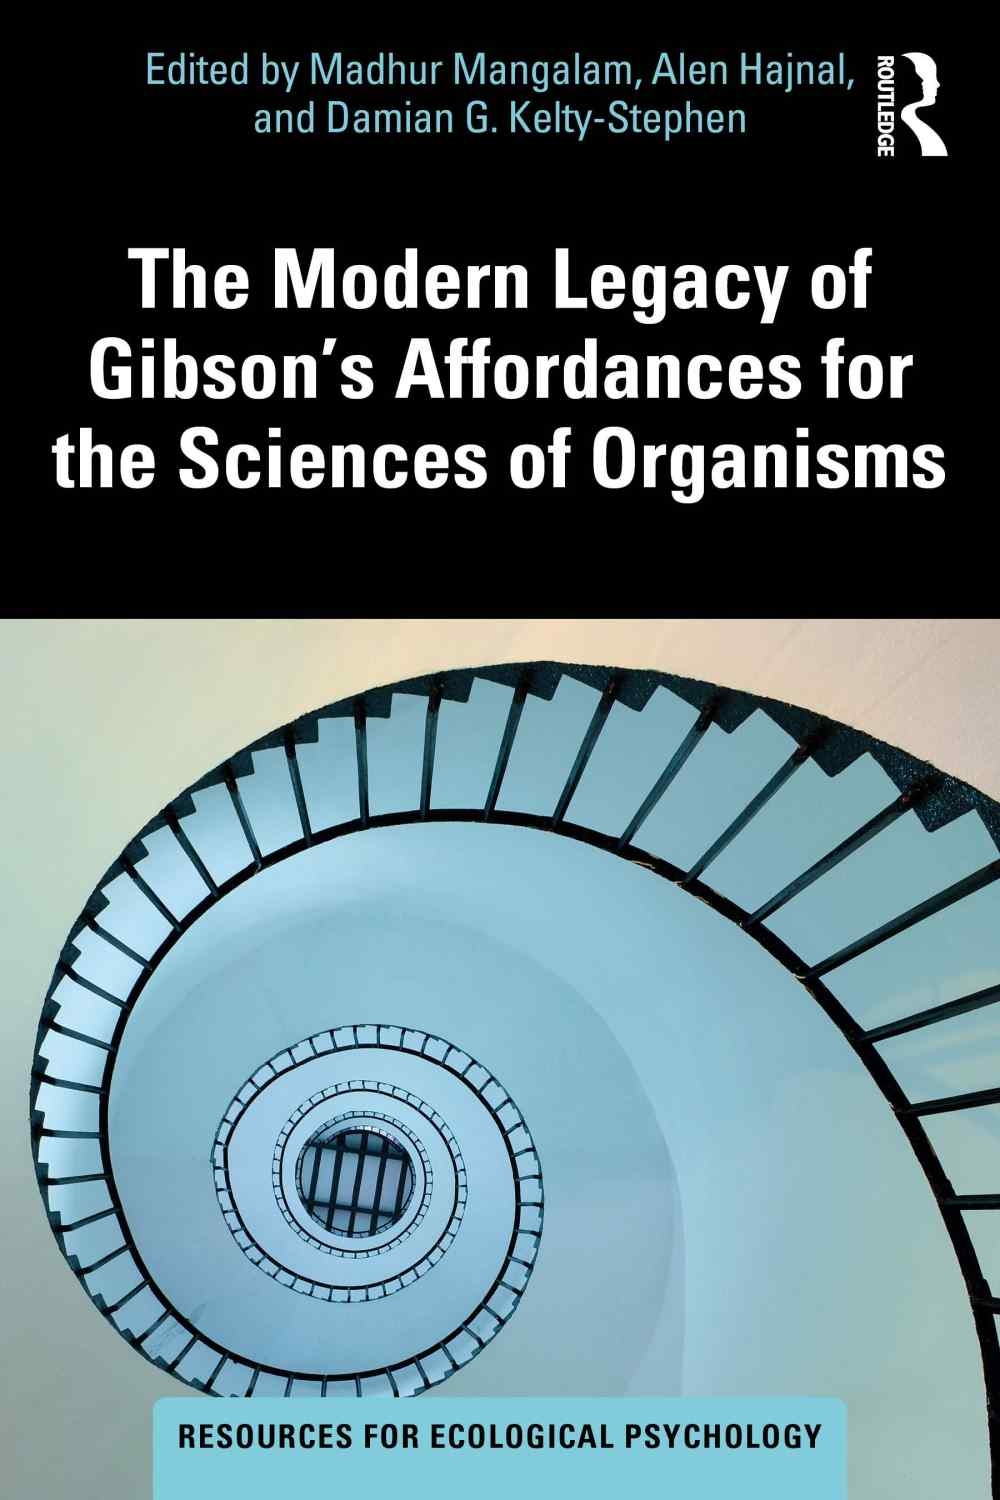 The Modern Legacy of Gibson’s Affordances for the Sciences of Organisms